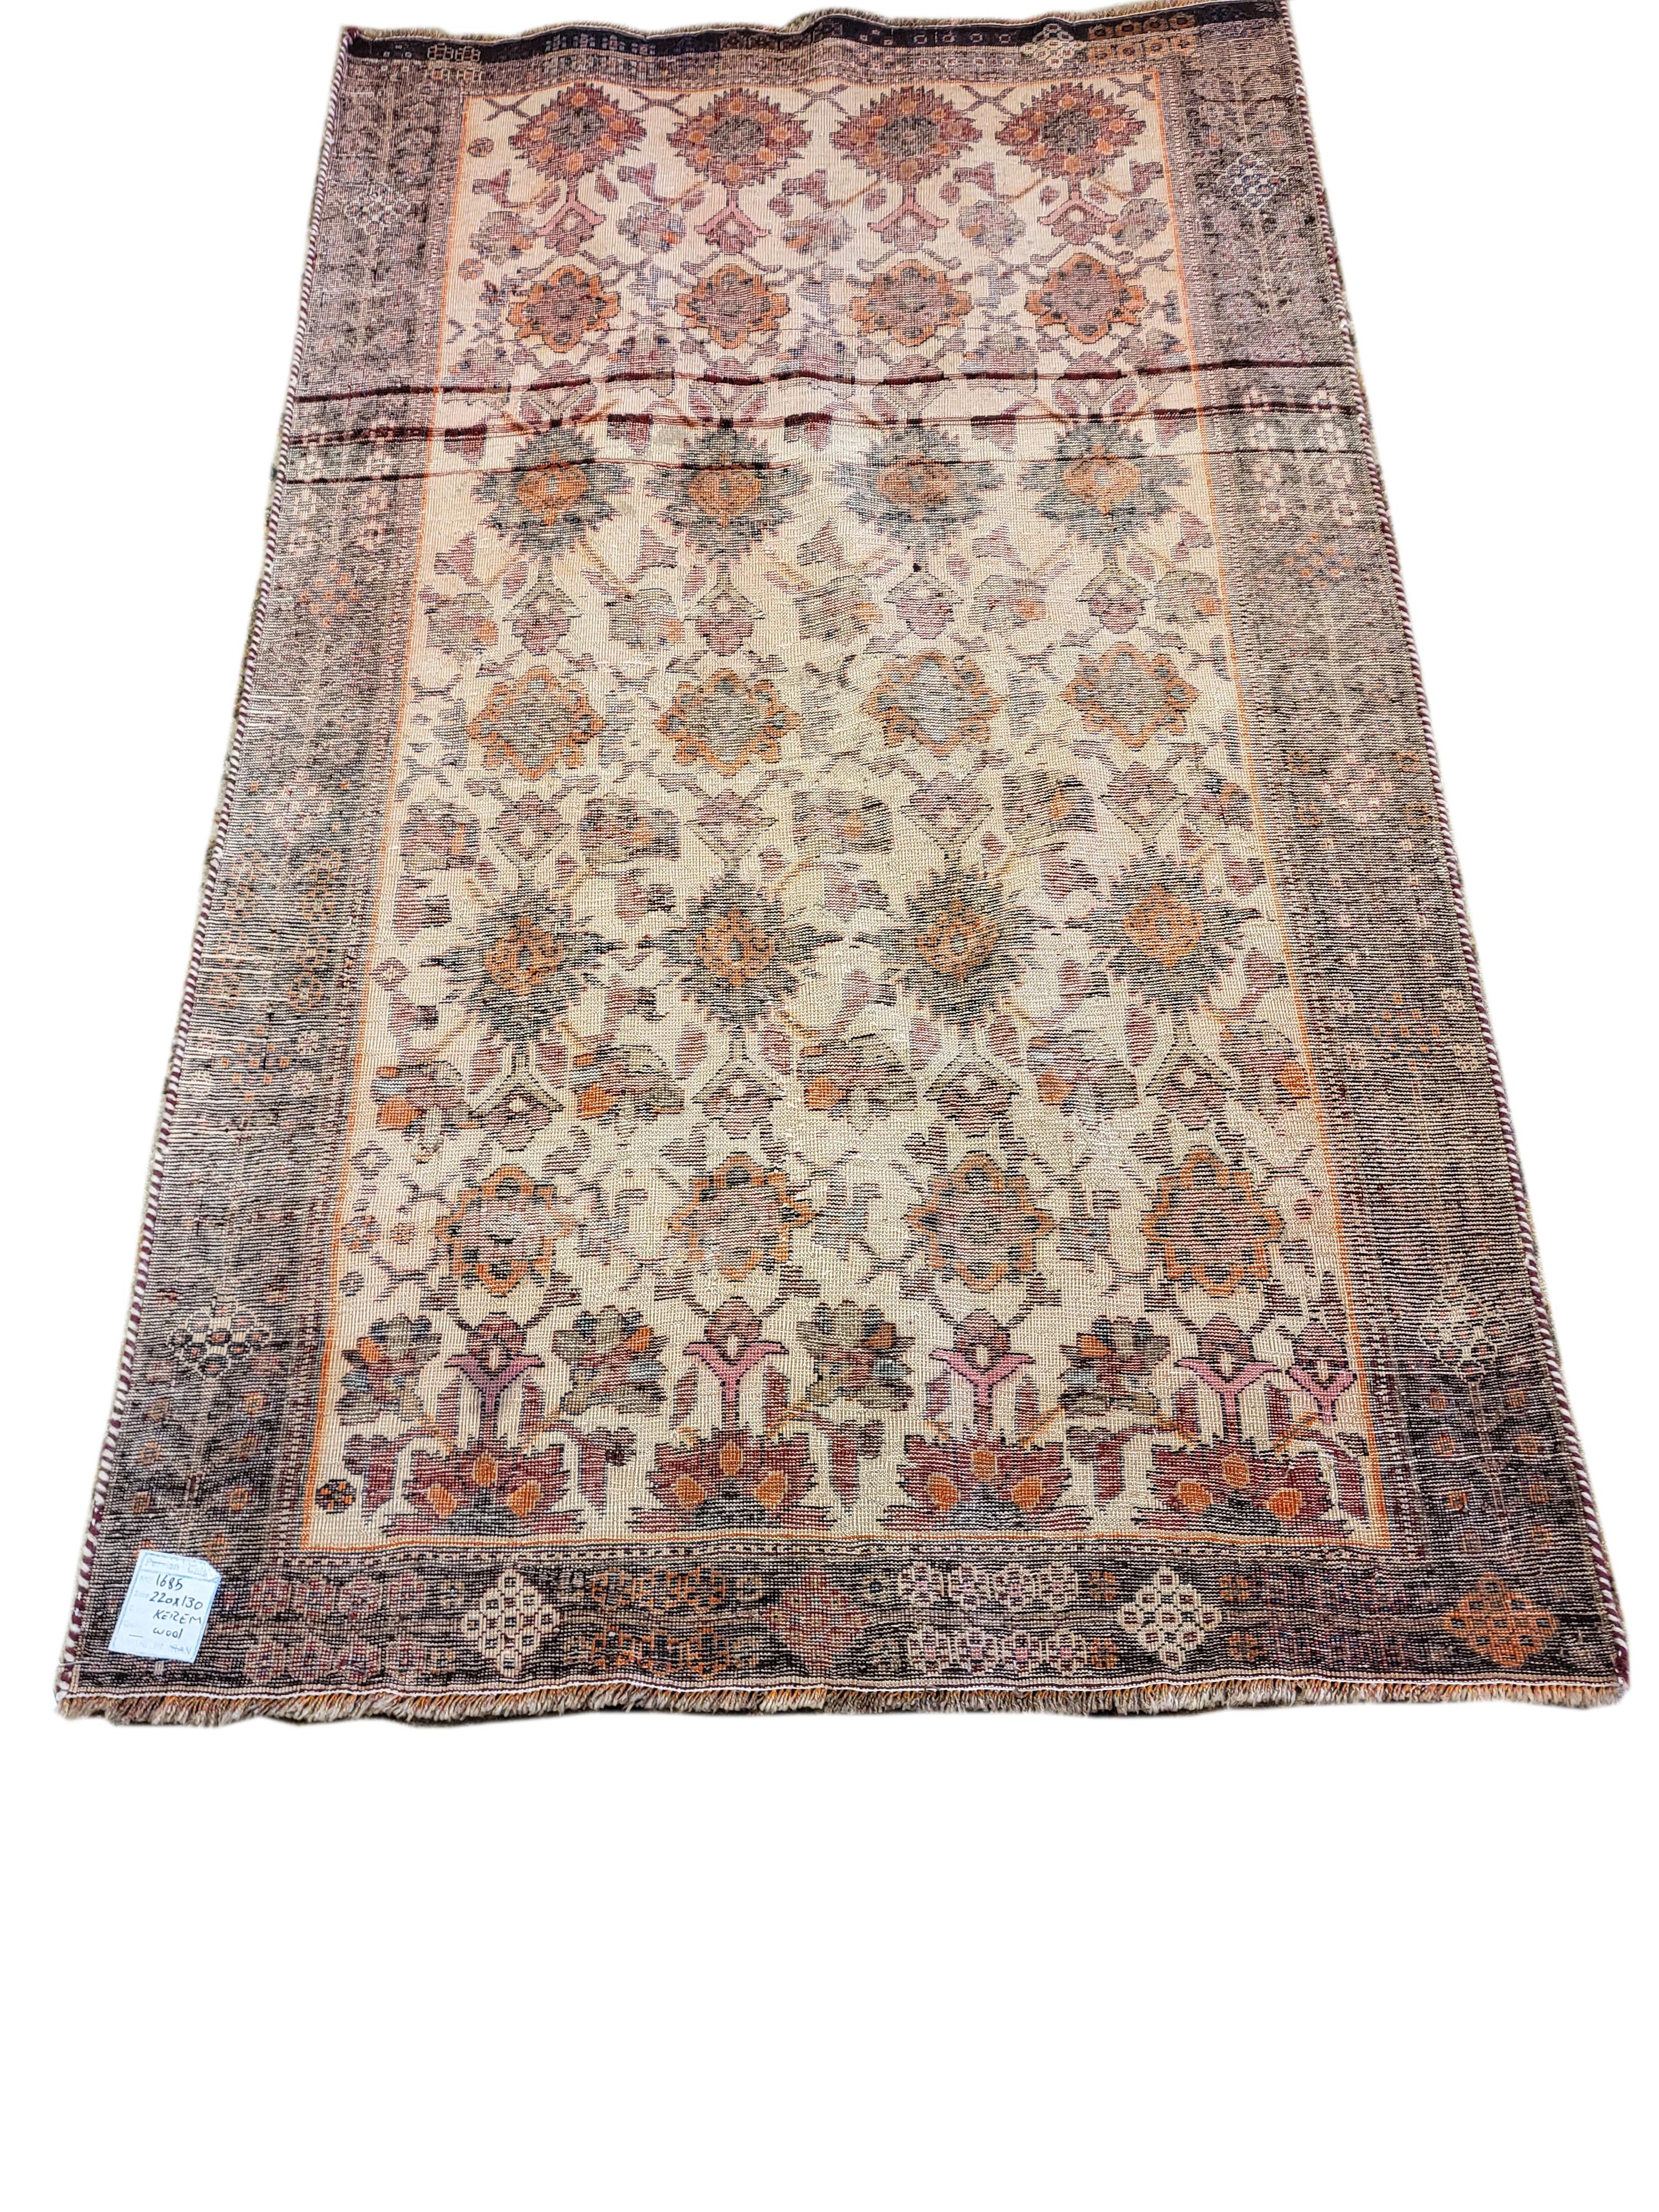 Unique 1950's Persian Qashqai rug. The Qashqais are a tribe of nomadic Persians that weave some of the most interesting rug designs in the world. This rug's design is incredibly unique for what Qashqais usually weave. It's uncommon  to have a light